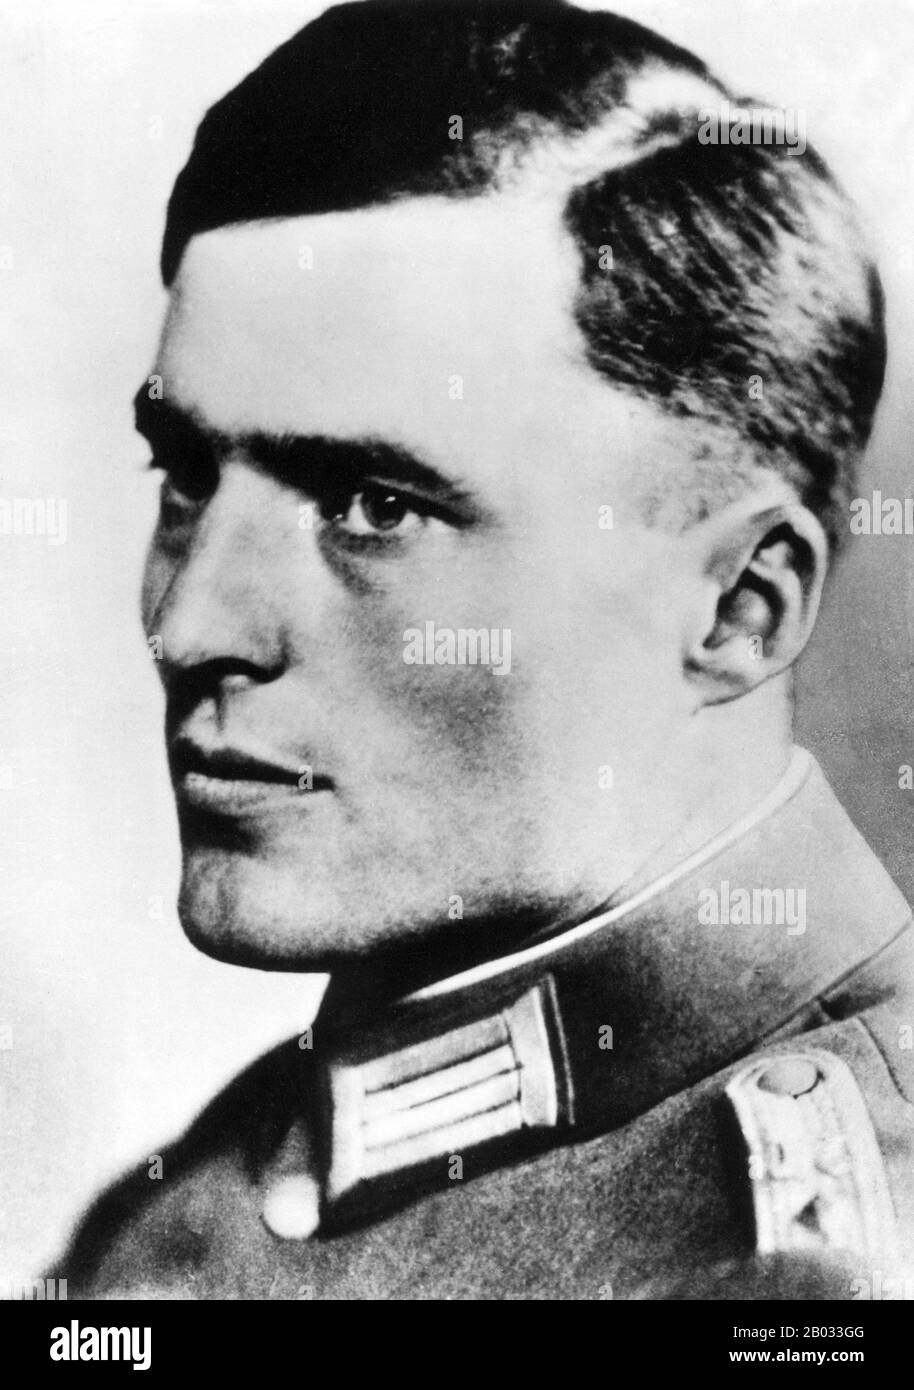 Claus Philipp Maria Schenk Graf von Stauffenberg, commonly referred to as Claus Schenk Graf von Stauffenberg (15 November 1907 – 21 July 1944), was a German army officer and member of the traditional German nobility who was one of the leading members of the failed 20 July plot of 1944 to assassinate Adolf Hitler and remove the Nazi Party from power.  Along with Henning von Tresckow and Hans Oster, he was one of the central figures of the German Resistance movement within the Wehrmacht. For his involvement in the movement he was executed by firing squad shortly after the failed attempt known as Stock Photo